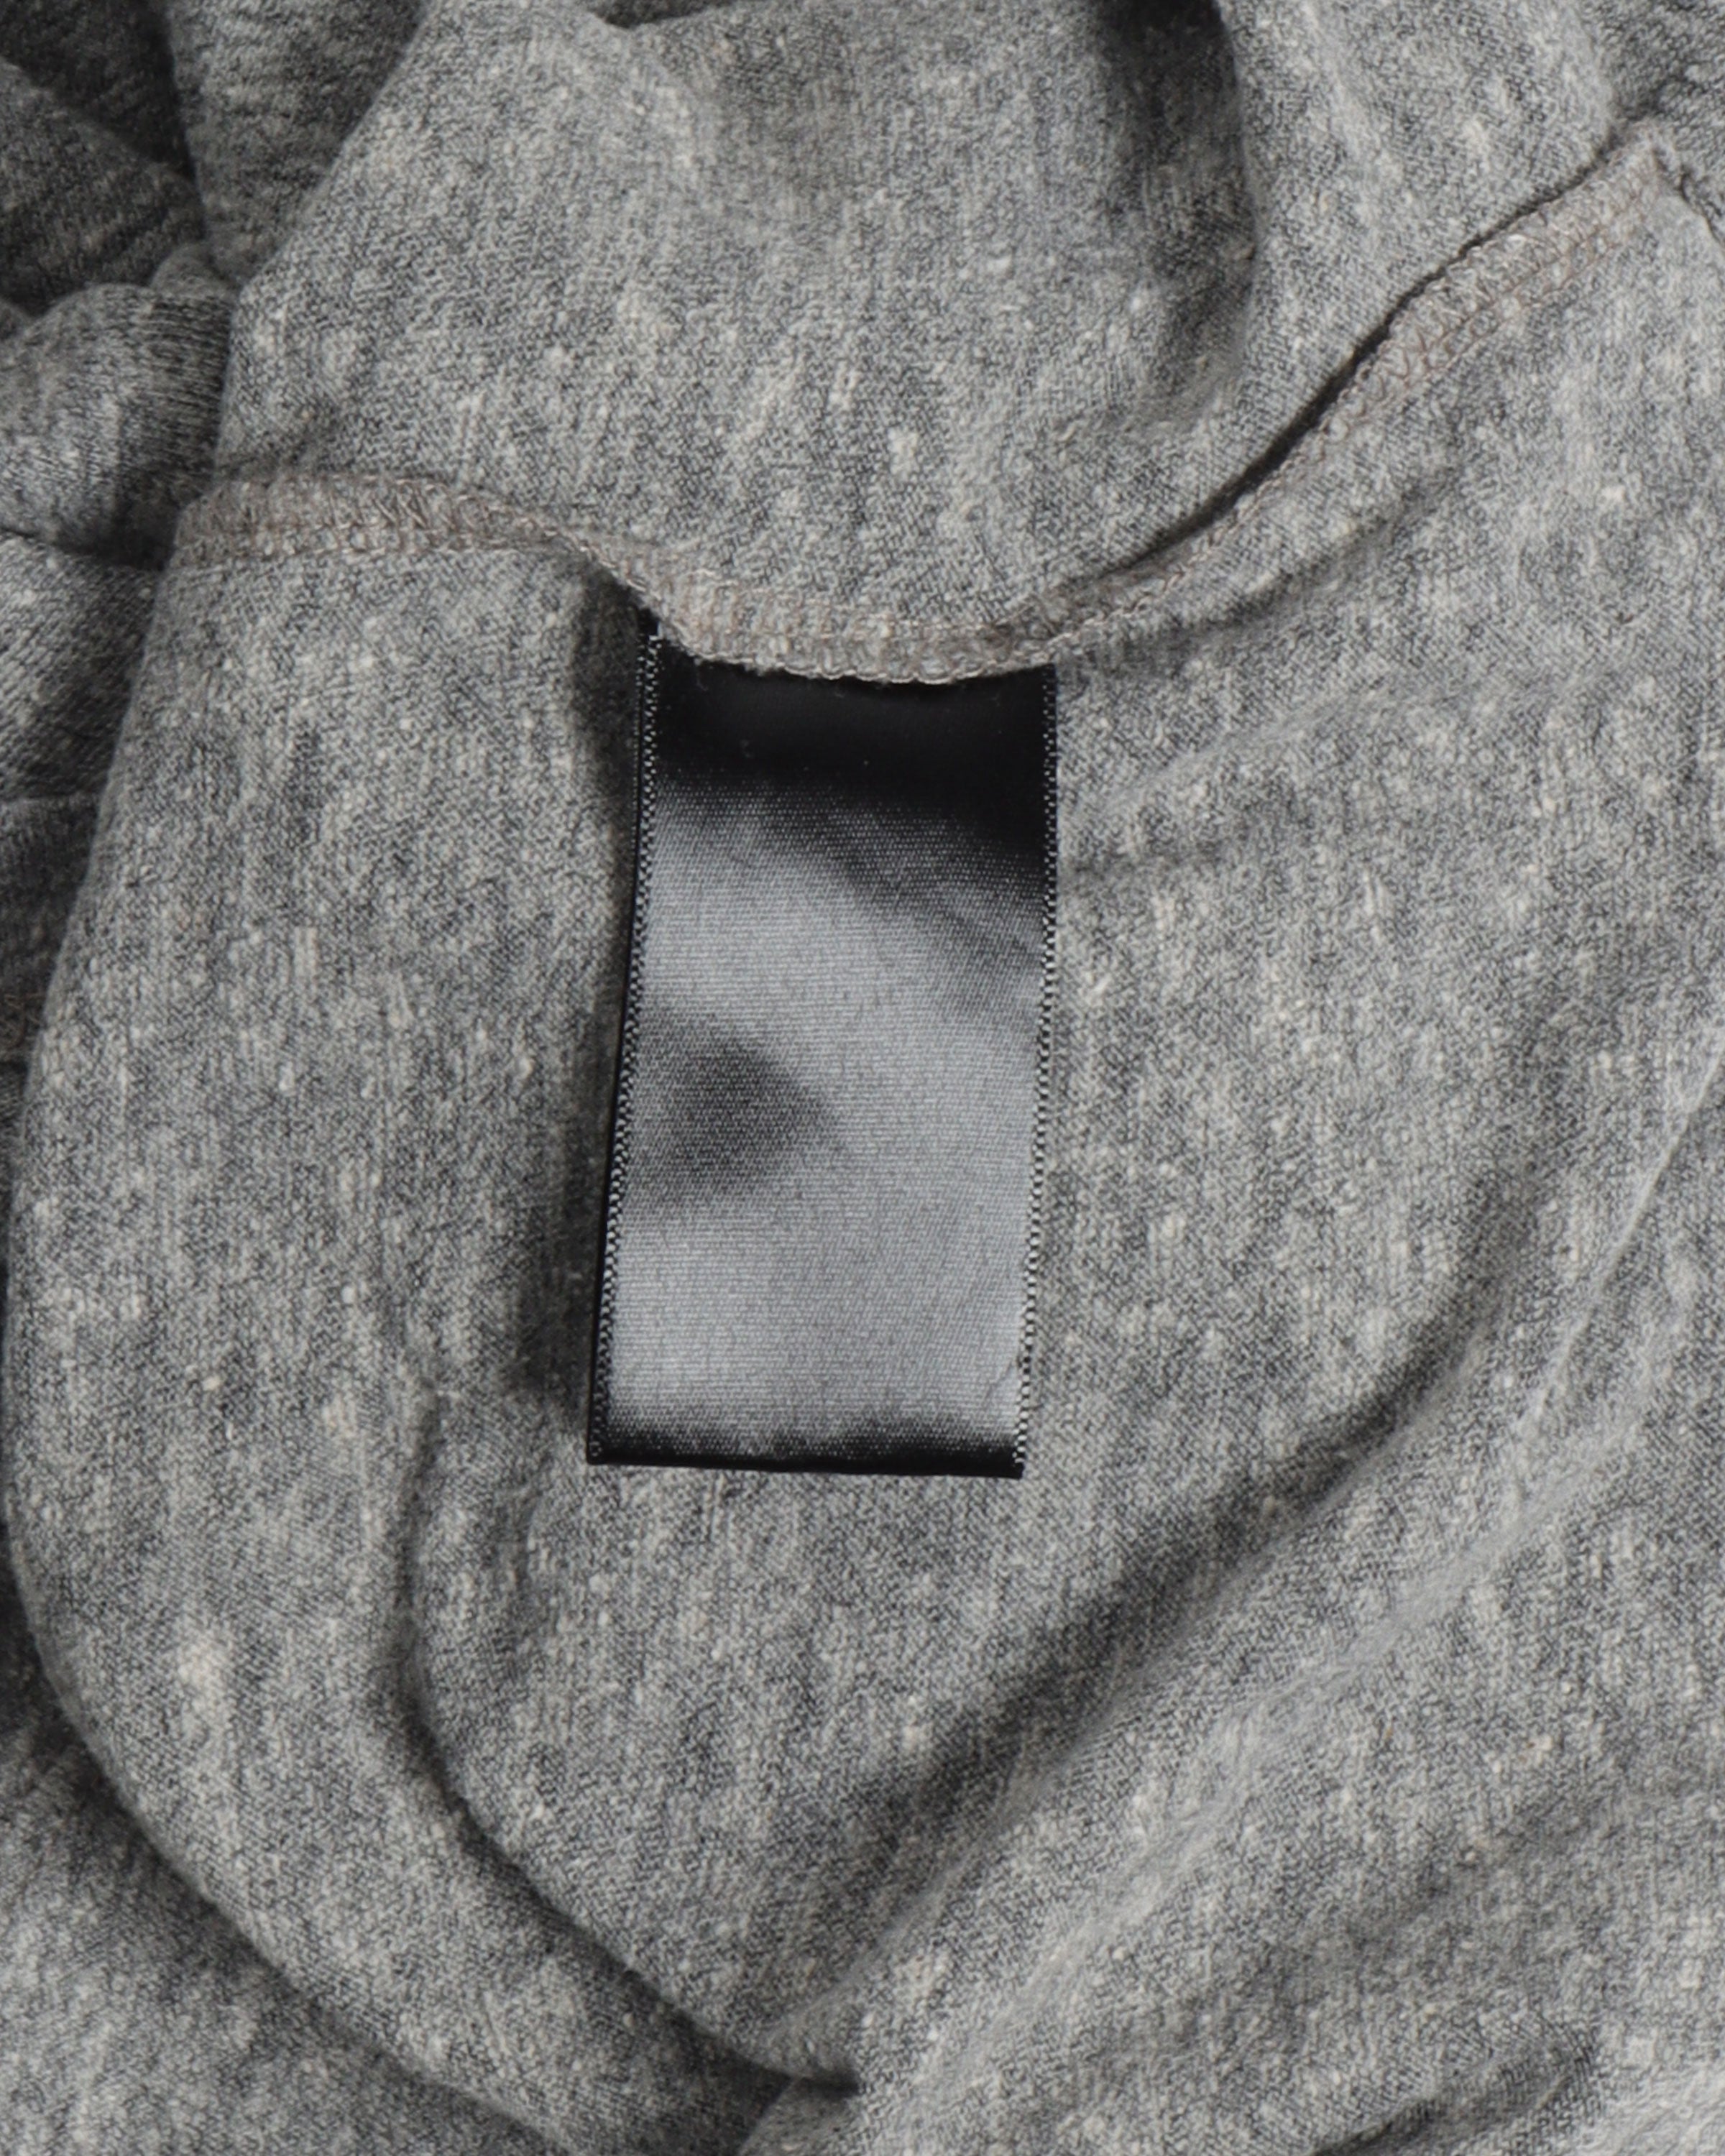 2nd Collection Grey Shirt